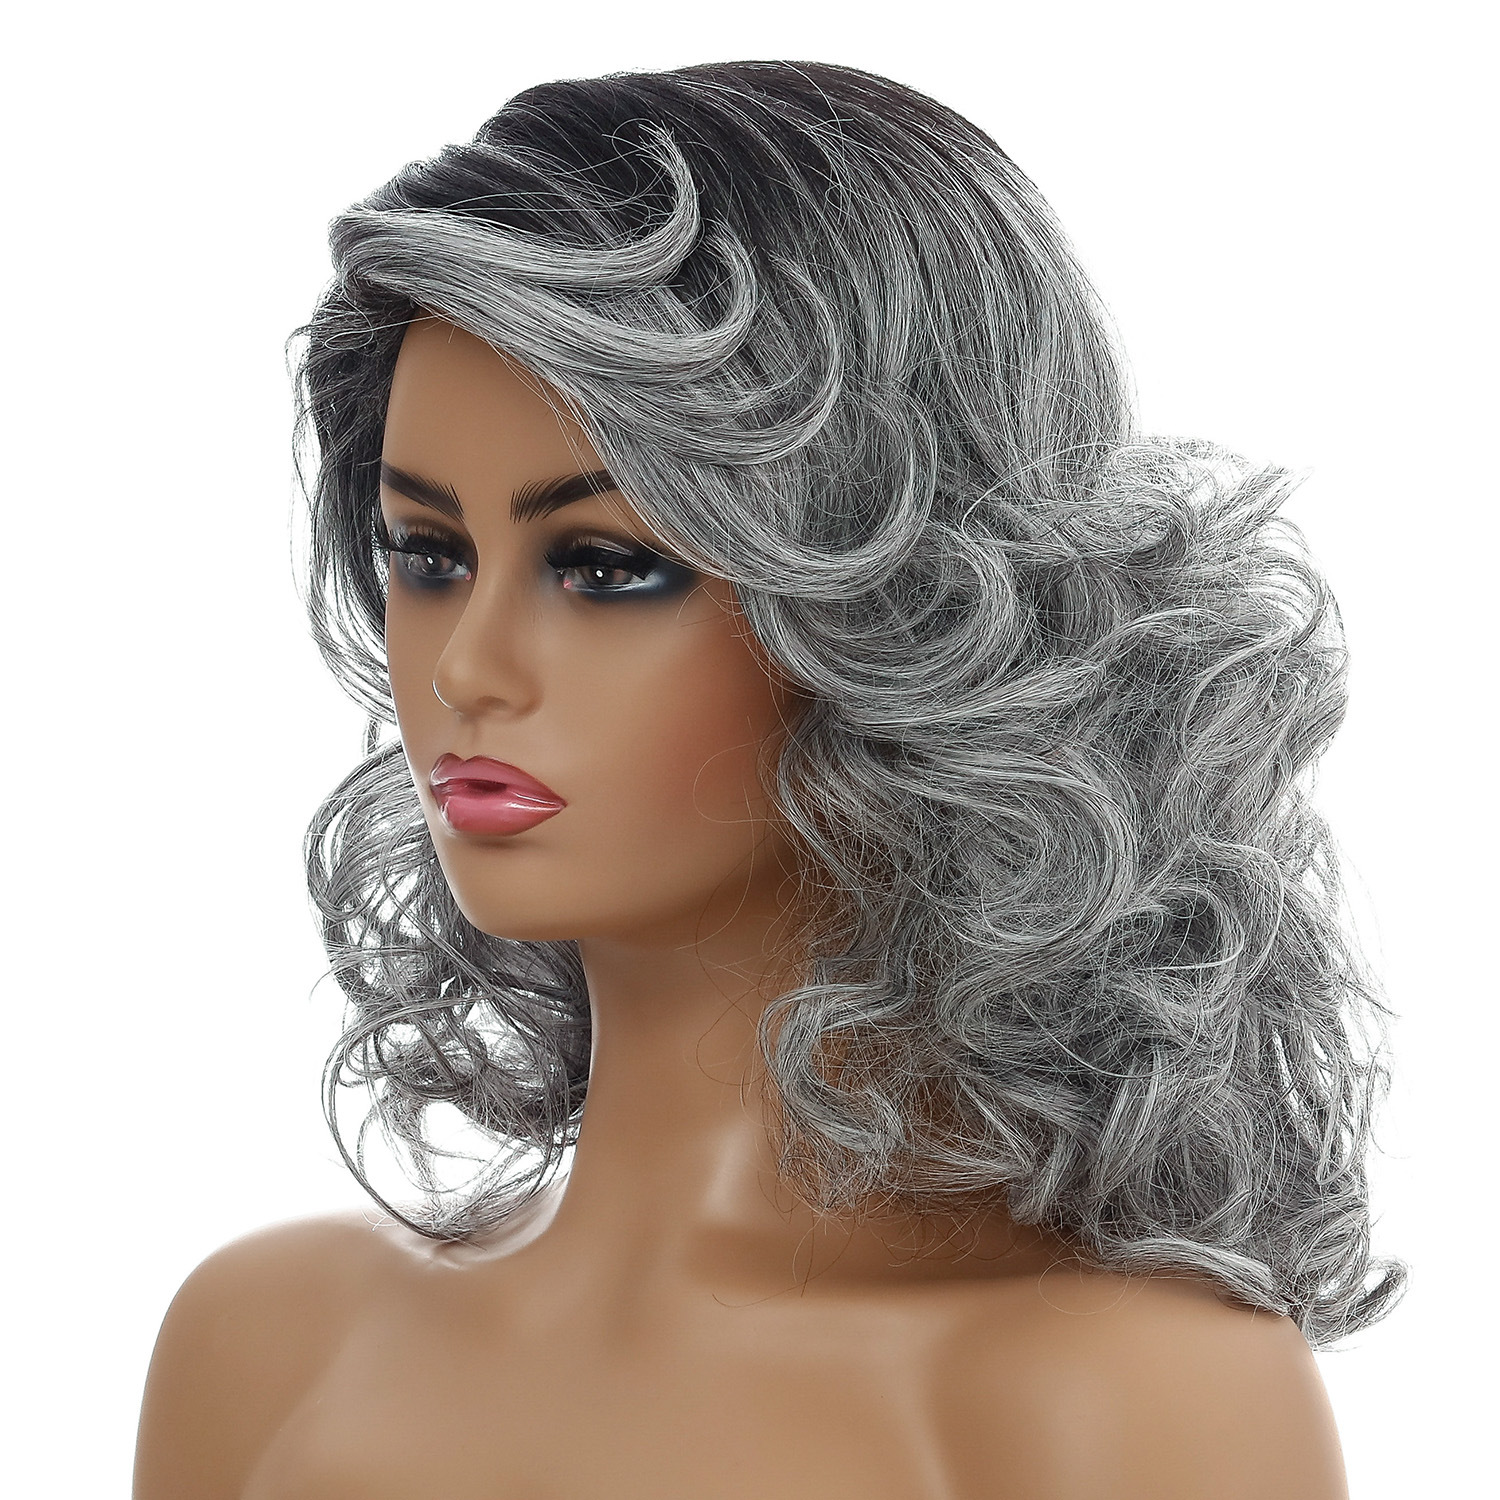 Chic black silver synthetic wig with medium-length curly hair, designed for a stylish look